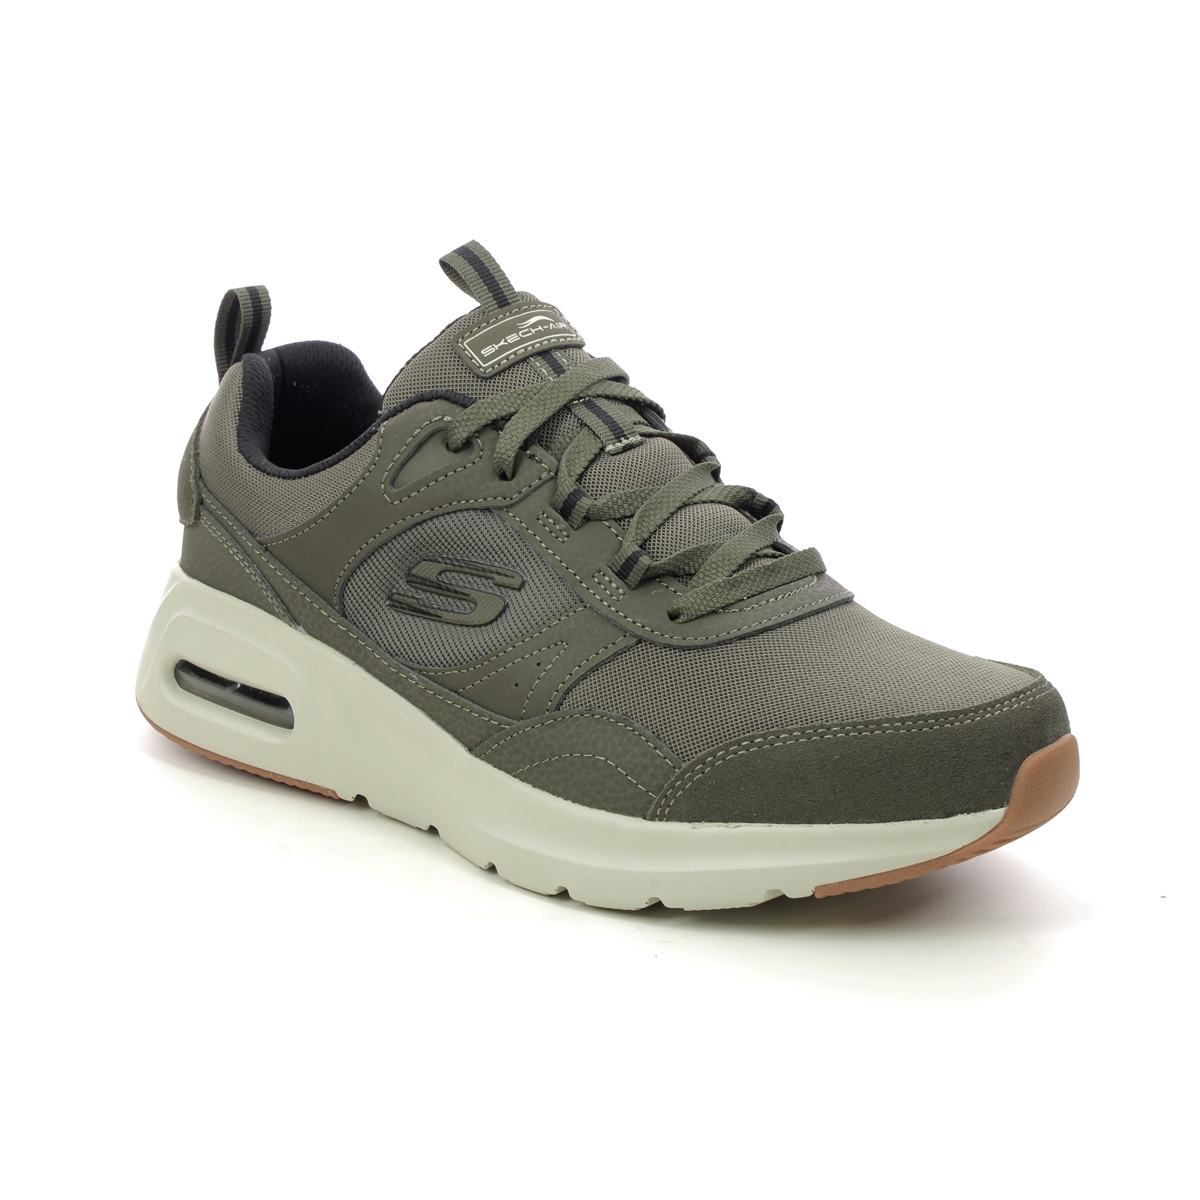 Skechers Skech Air Court OLV Olive Green Mens trainers 232646 in a Plain Leather and Man-made in Size 8.5